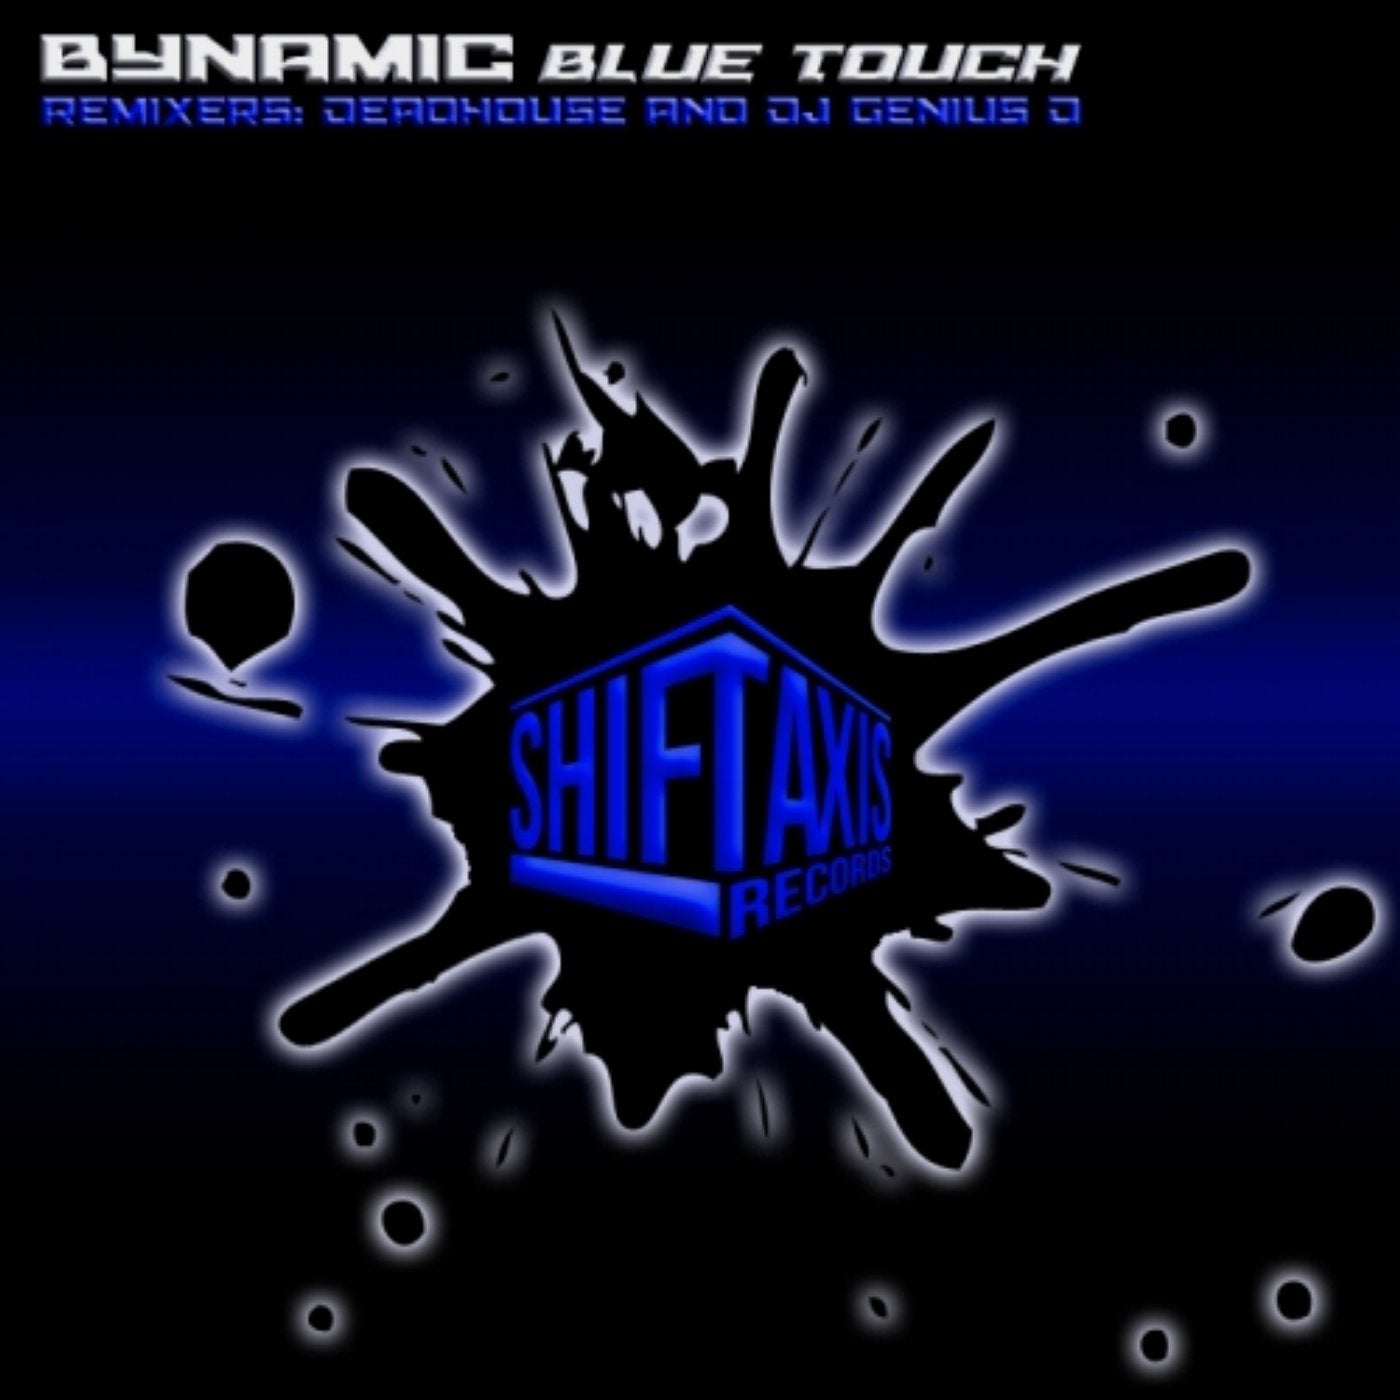 Blue Touch